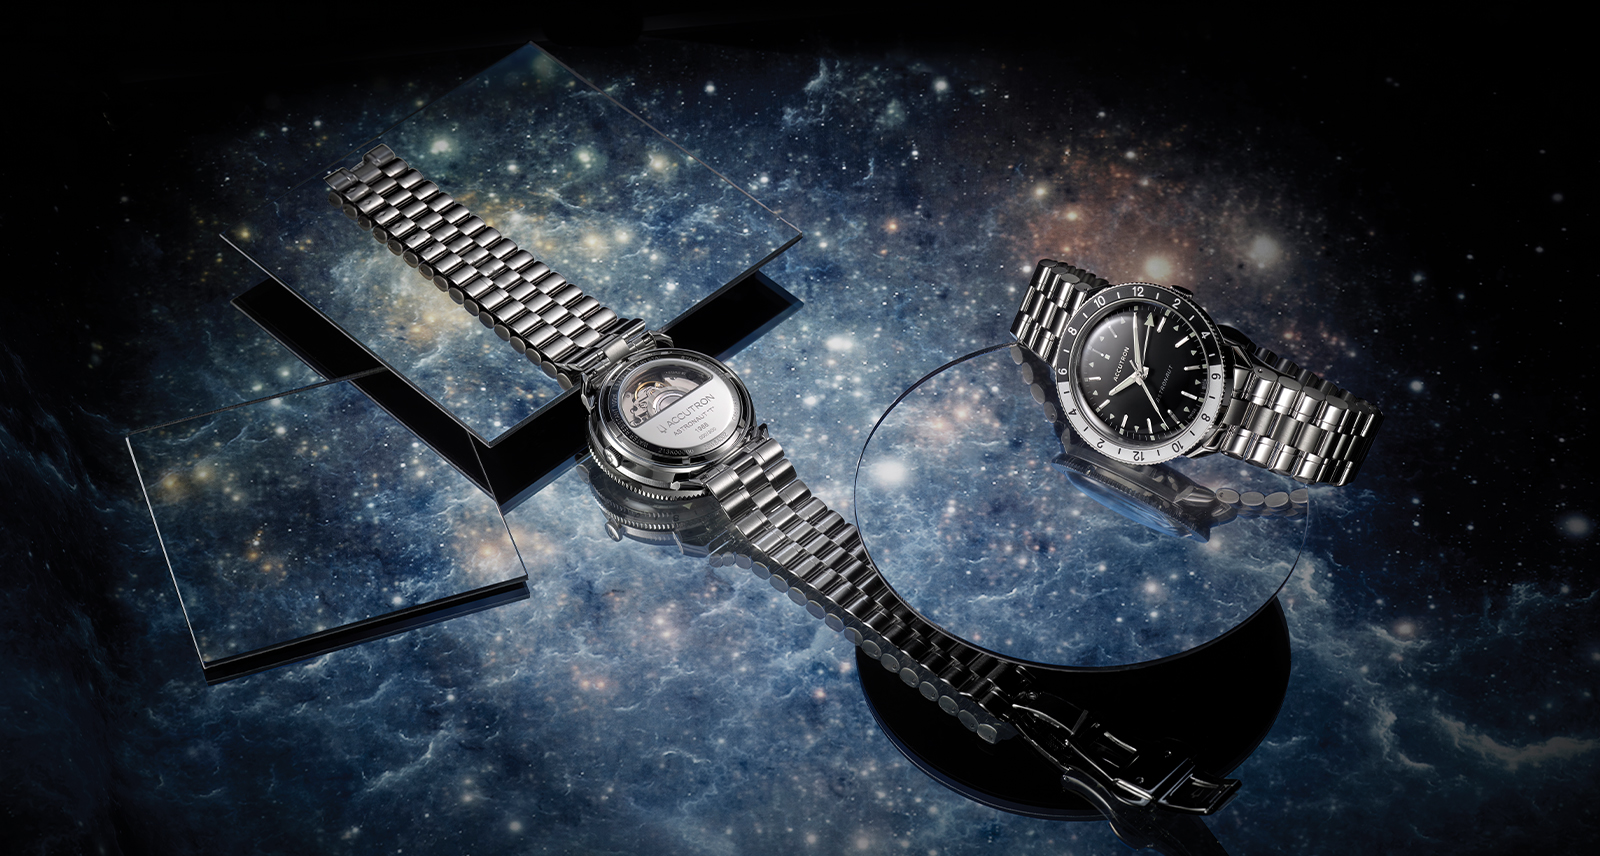 Accutron returns to the space age